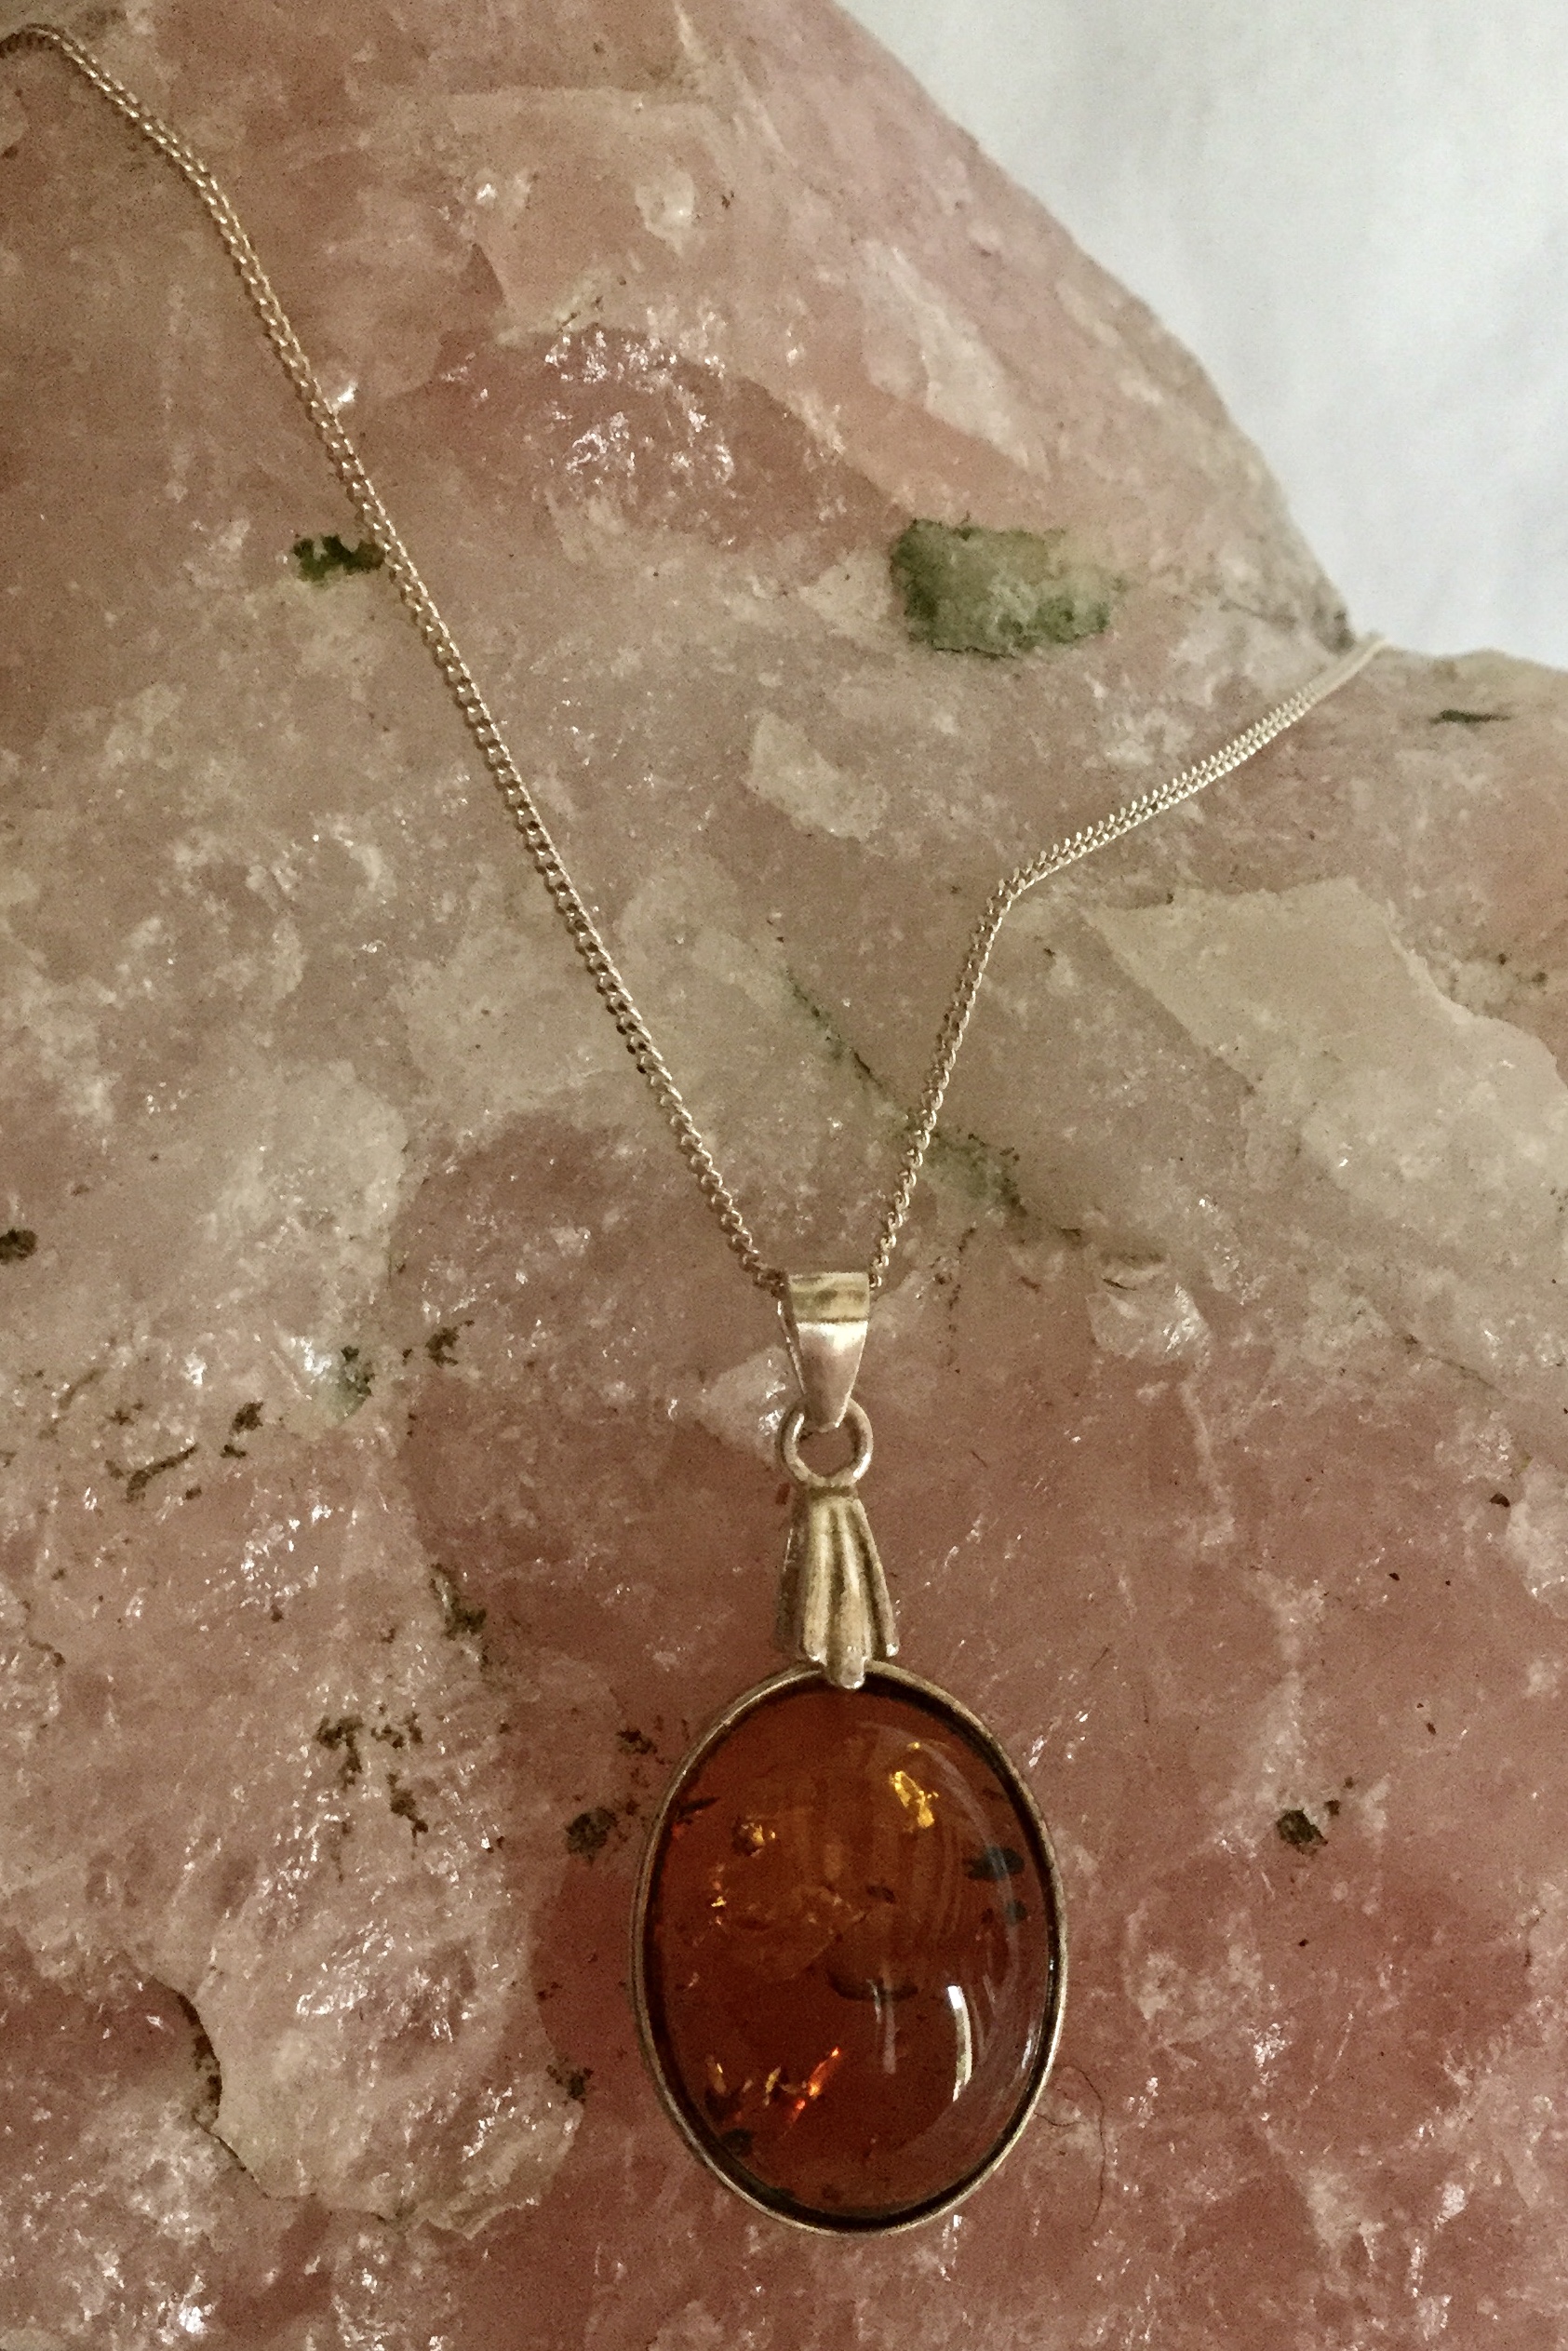 Baltic Amber Oval Pendant On Chain 925 Silver Necklace - Image 2 of 5